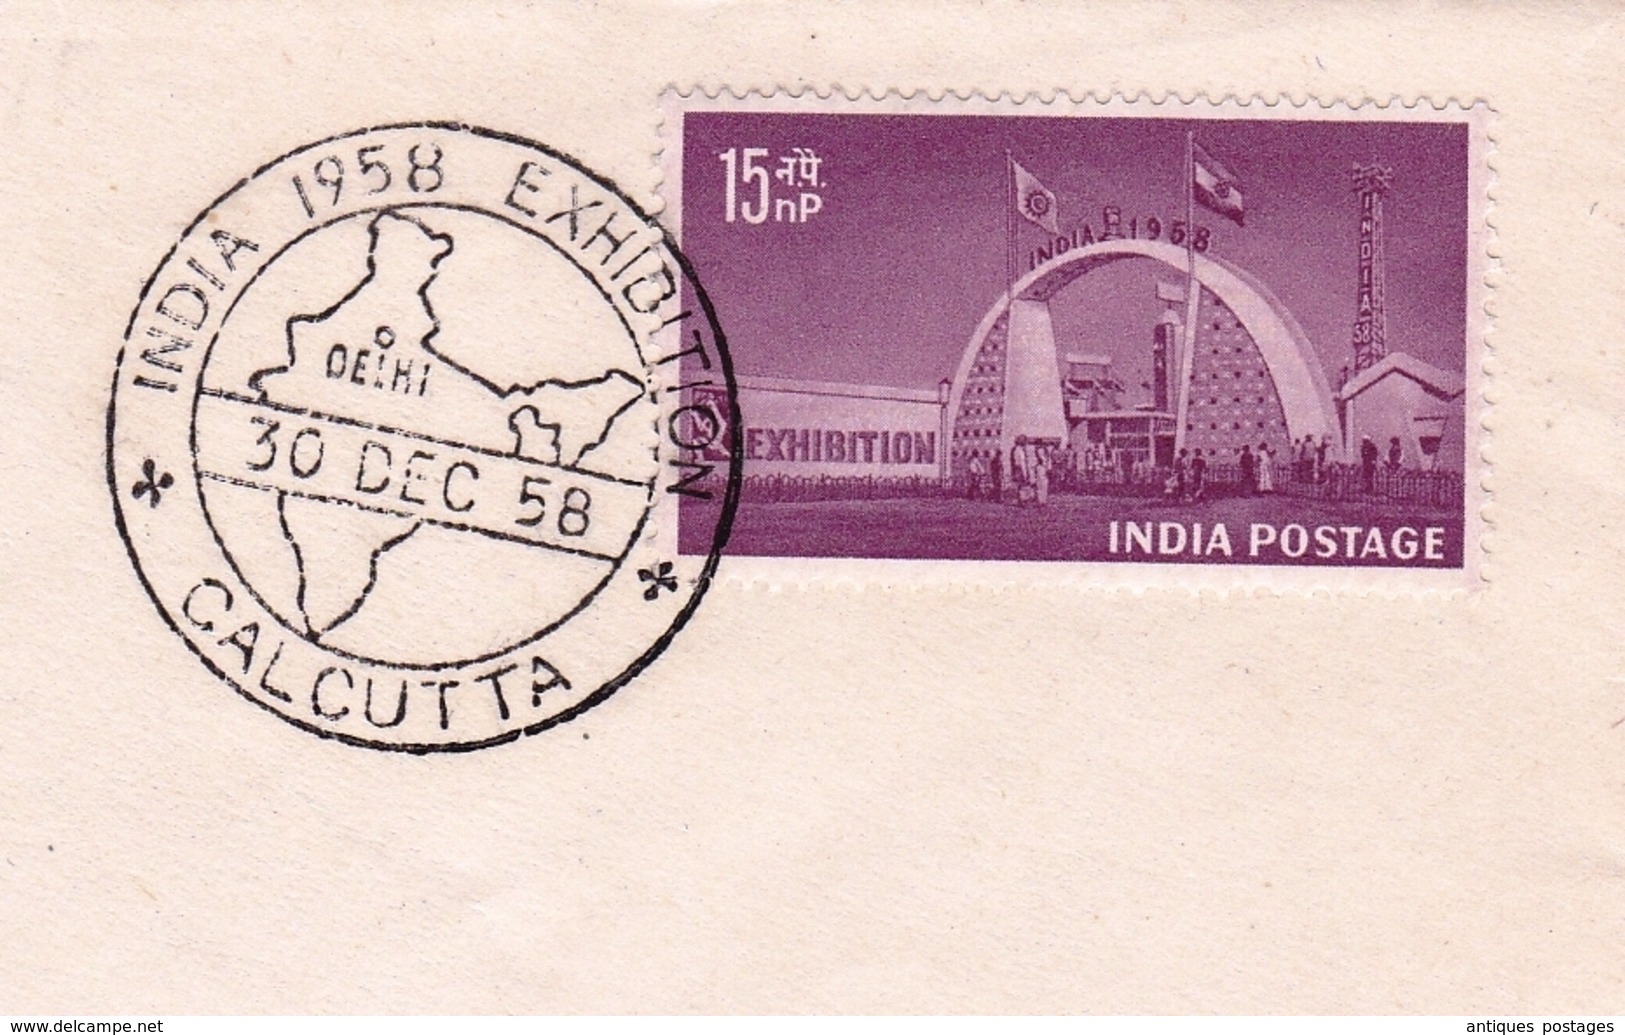 India Exhibition Indian Posts & Telegraphs 1958 Calcutta First Day Cover - FDC